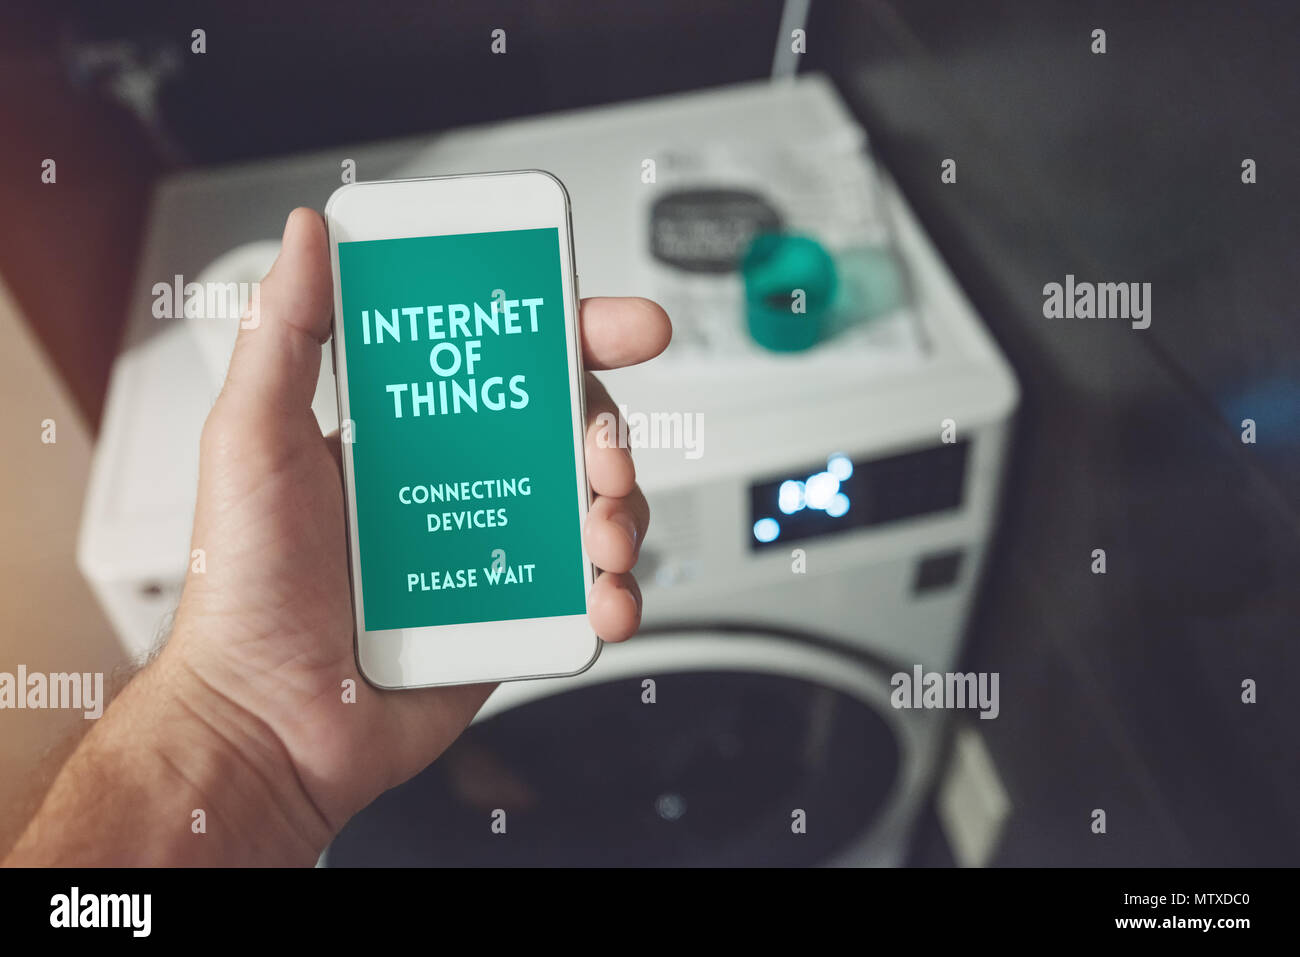 Internet of things, smartphone connecting with cloth washer and dryer. Smart home kitchen appliance connecting with mobile phone and exchanging data. Stock Photo